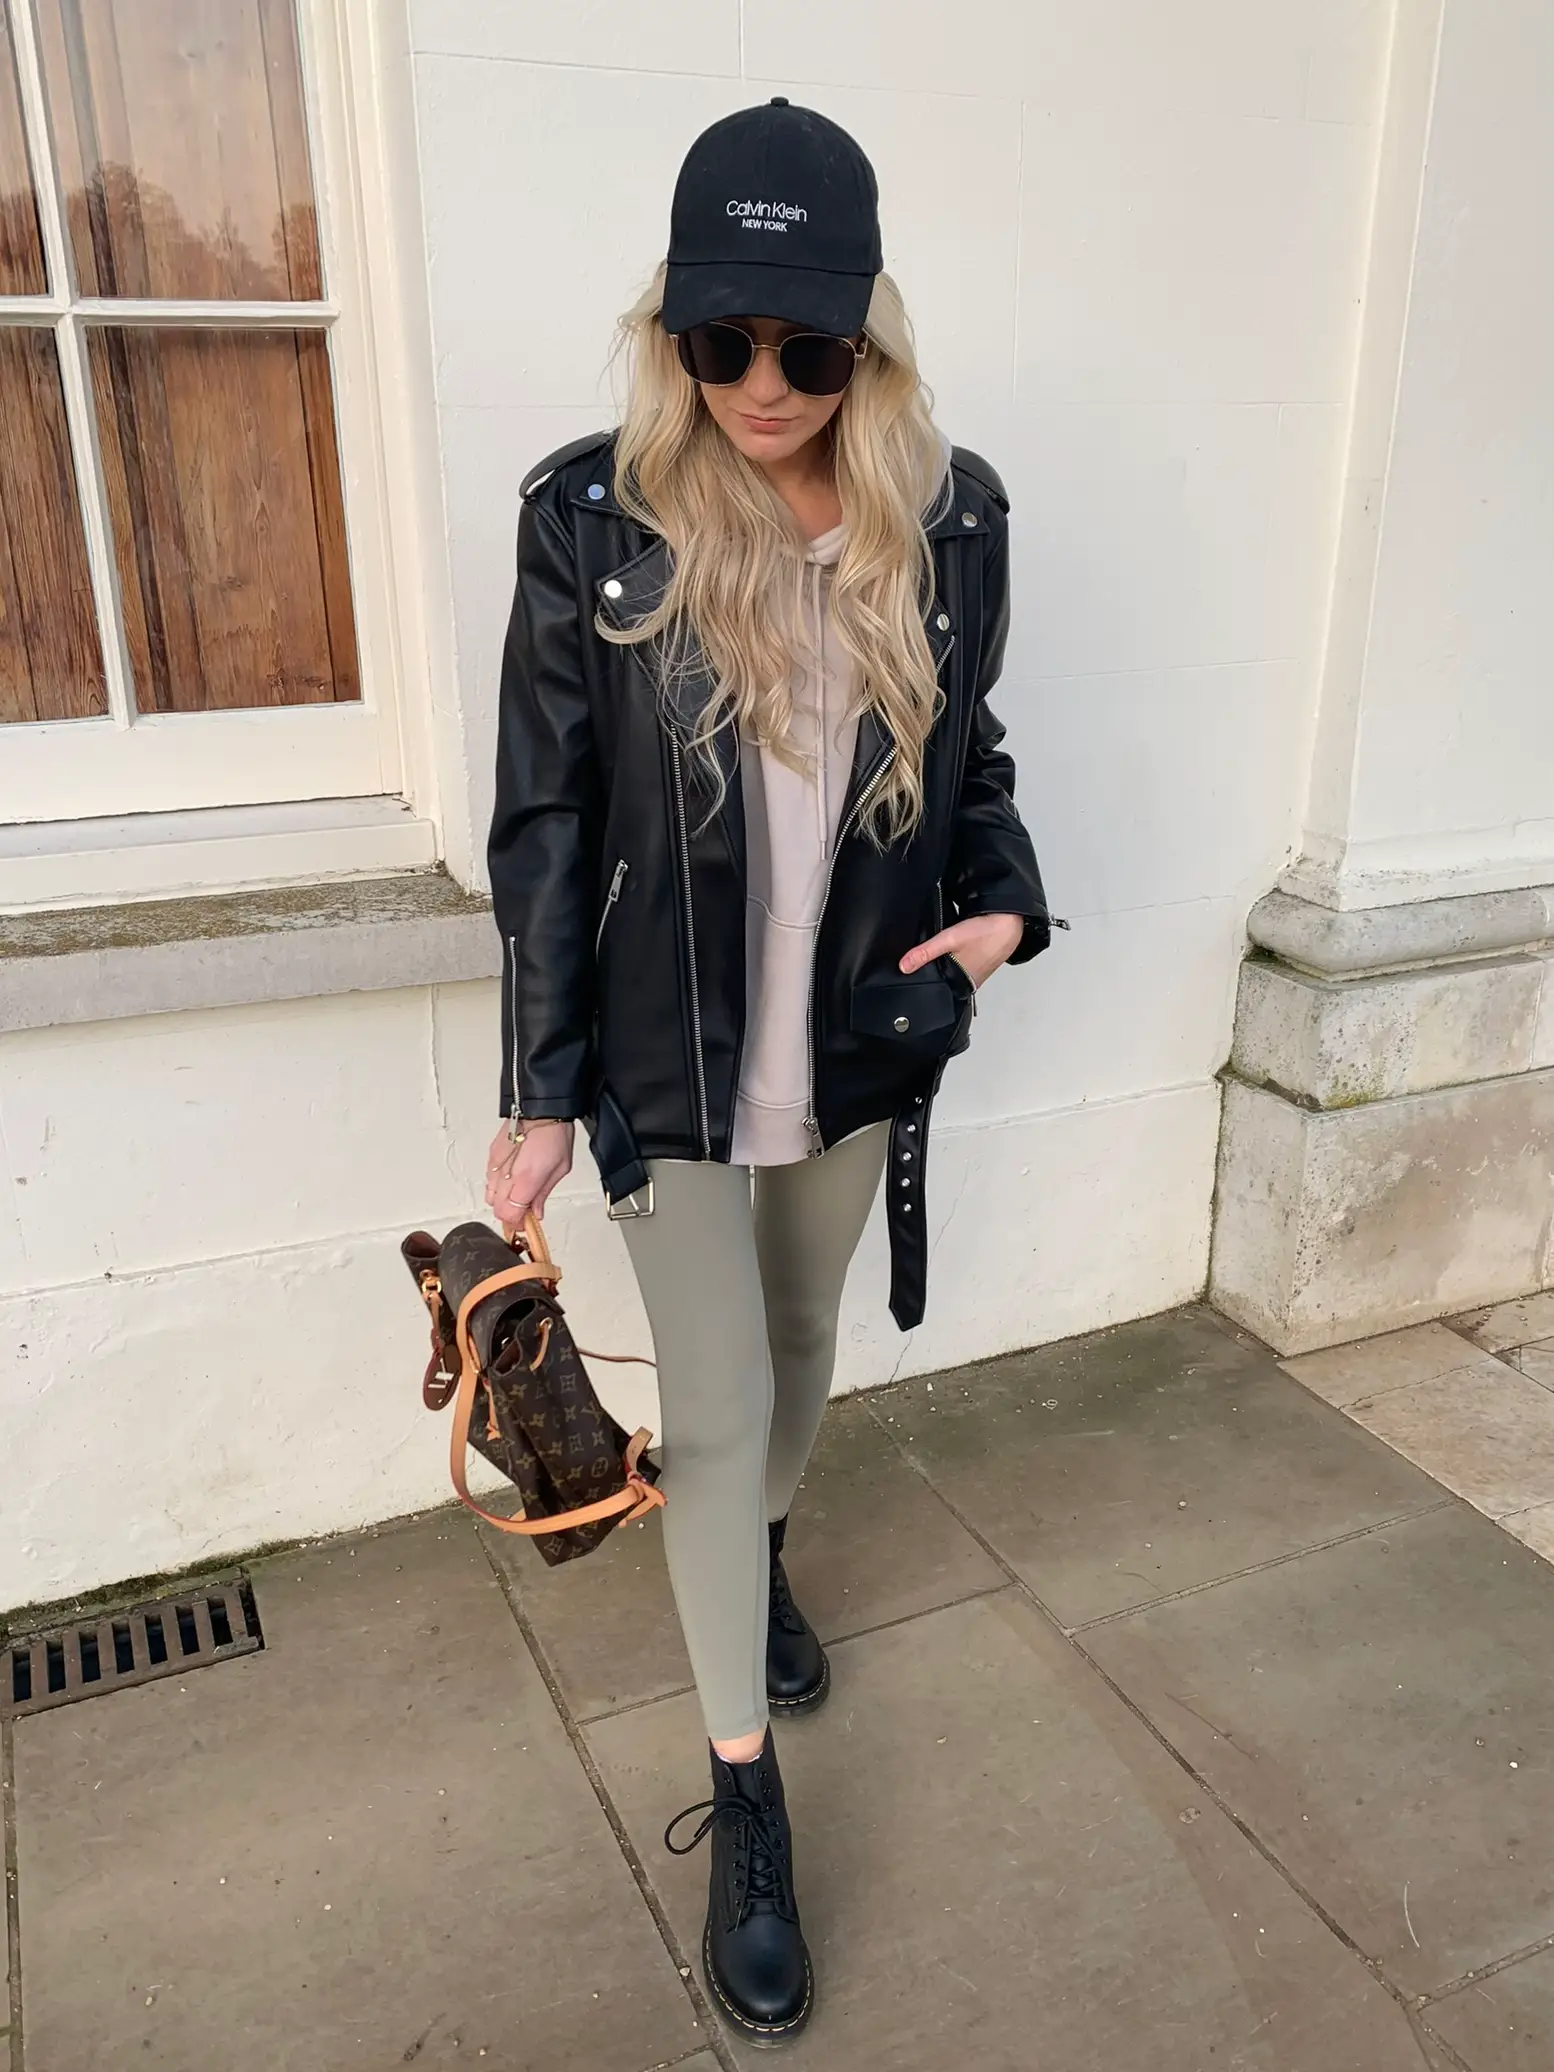 sage green flared legging outfit｜TikTok Search